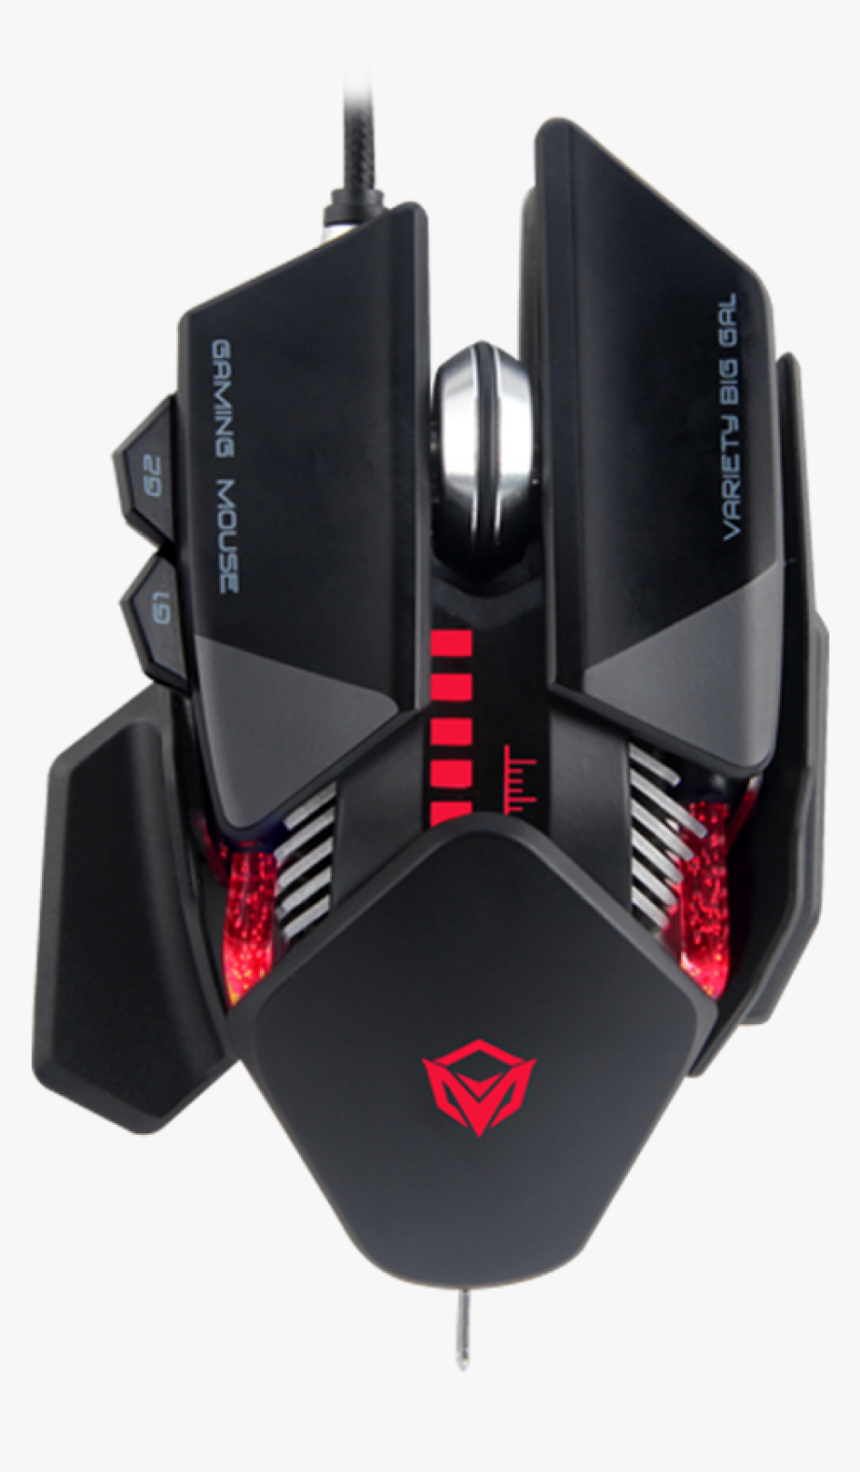 Transformers Gaming Mouse - Transformer Gaming Mouse, HD Png Download, Free Download